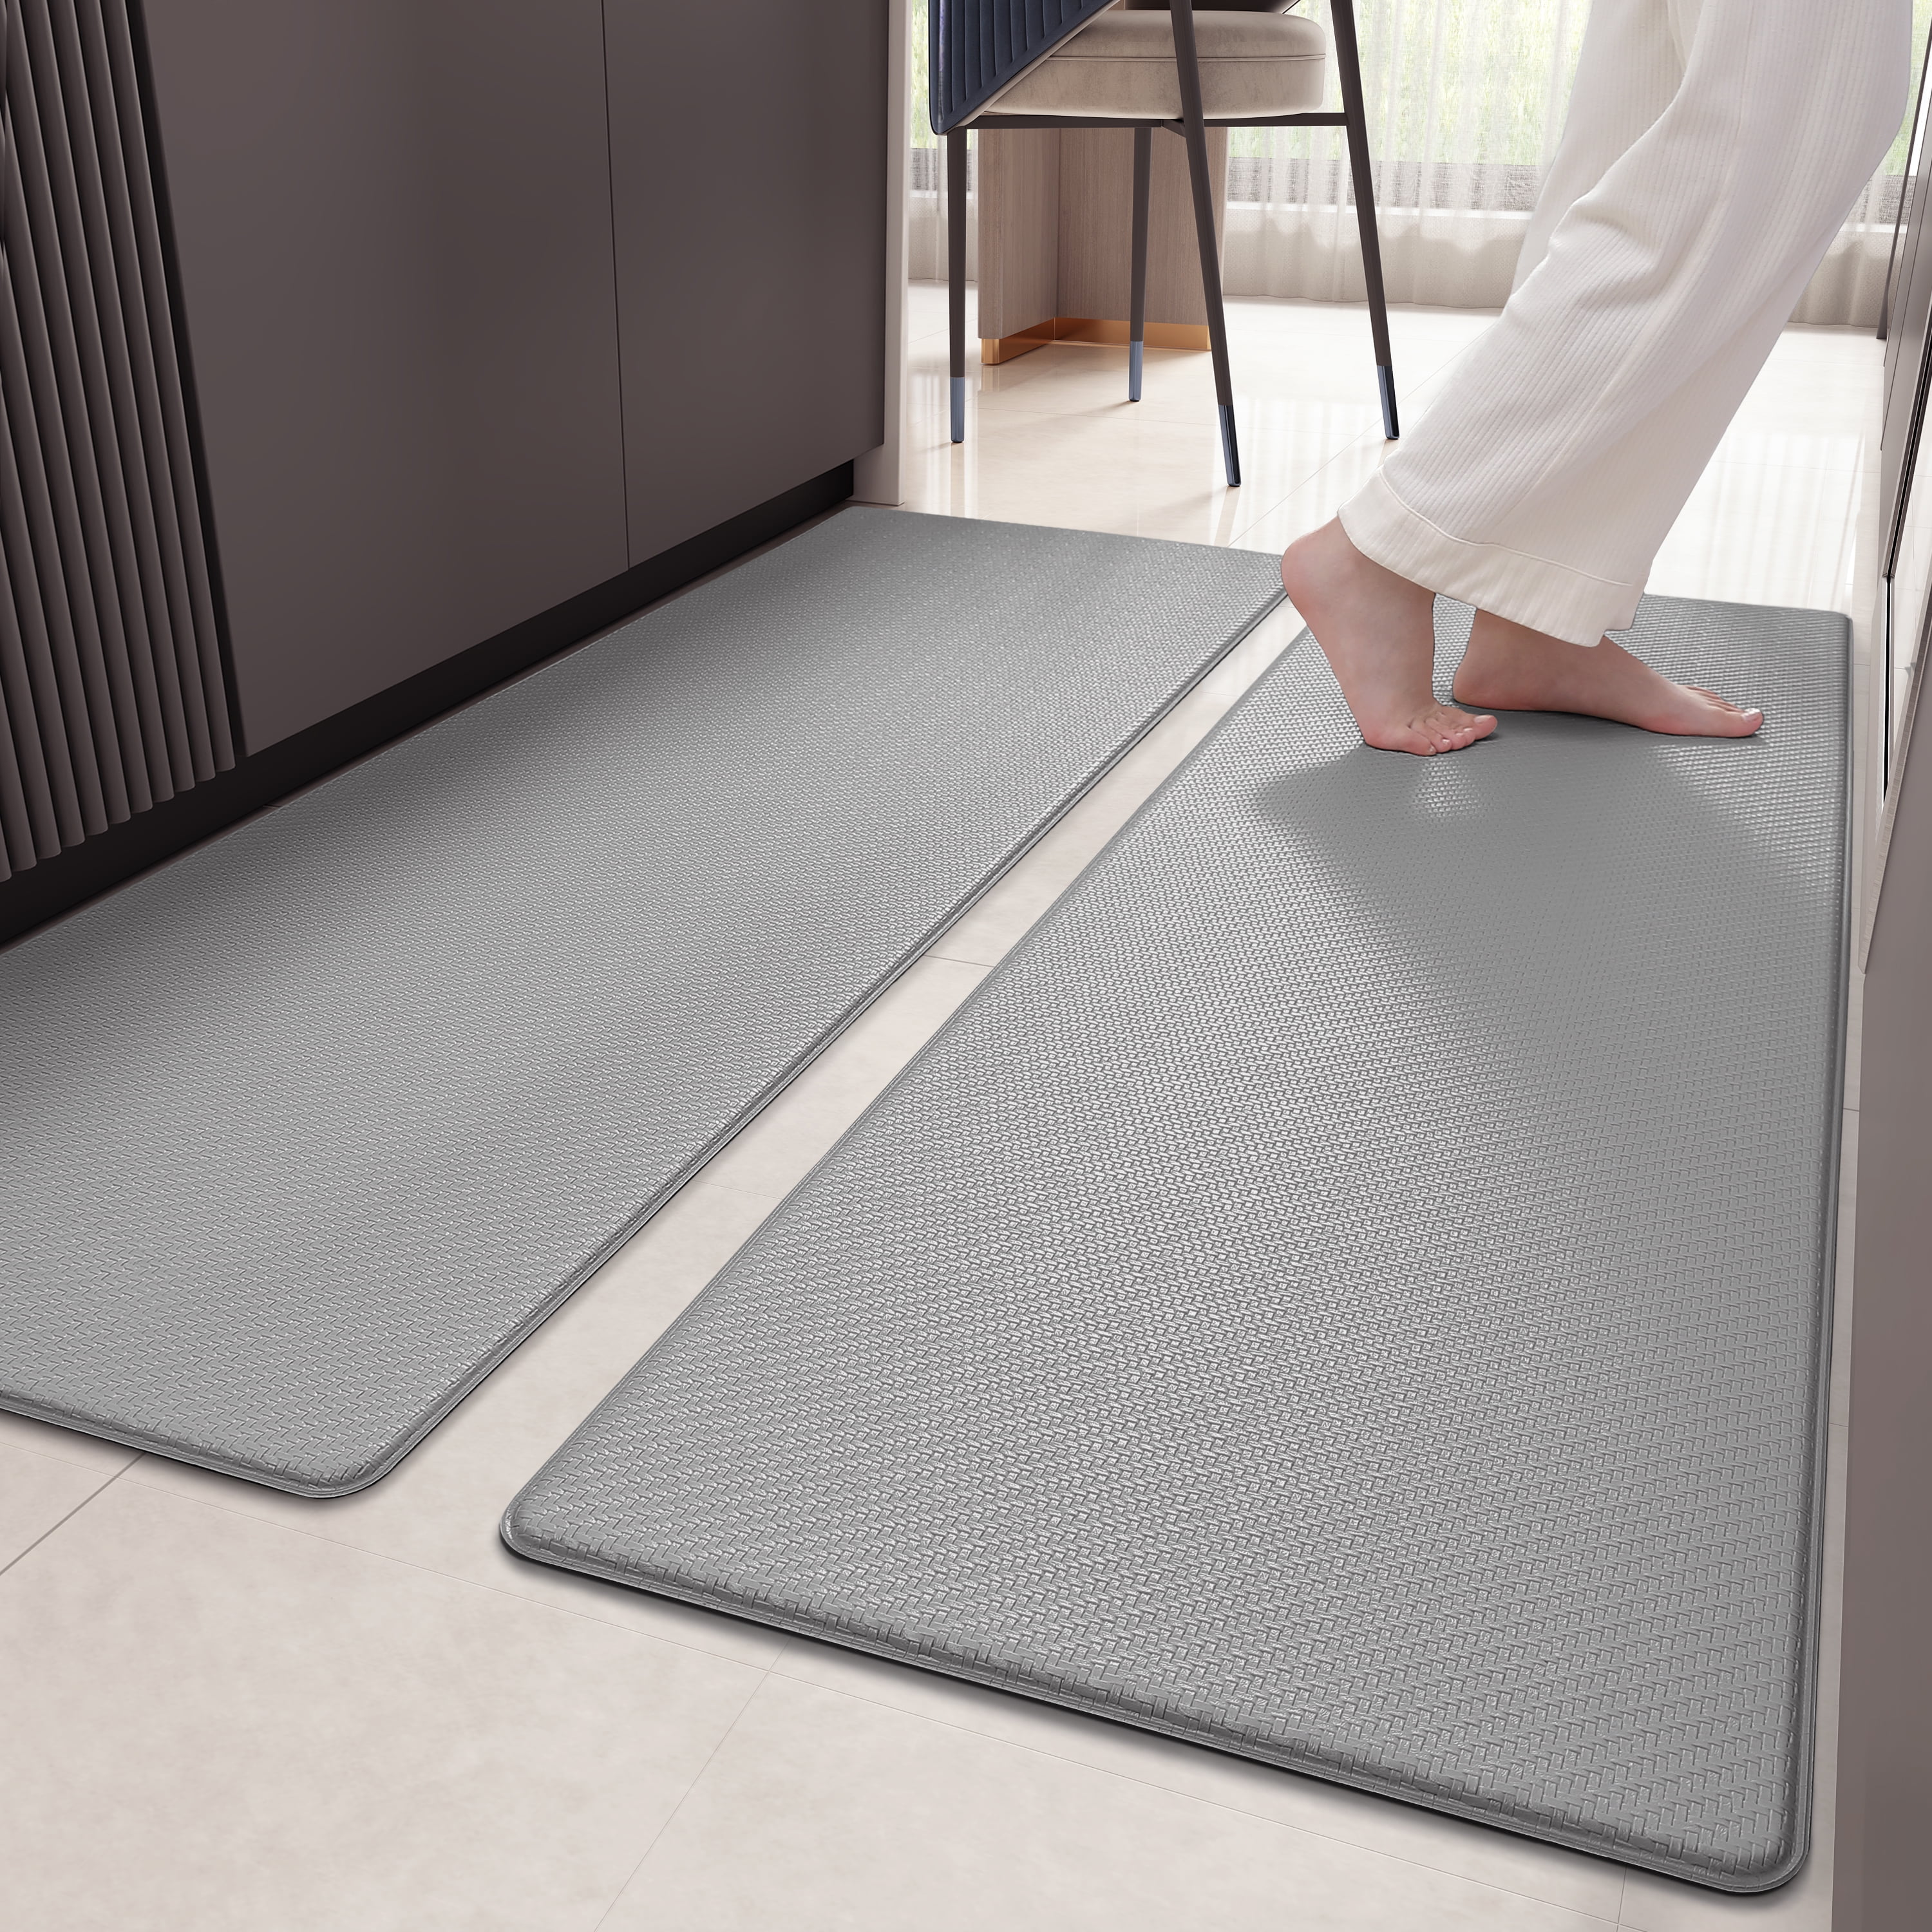 Pionism Sofort Kitchen Mat, Cushioned Anti Fatigue Kitchen Rug Set, 2 Pieces Non Slip Waterproof Kitchen Mats for Floor, Comfort Heavy Duty Standing Mat for